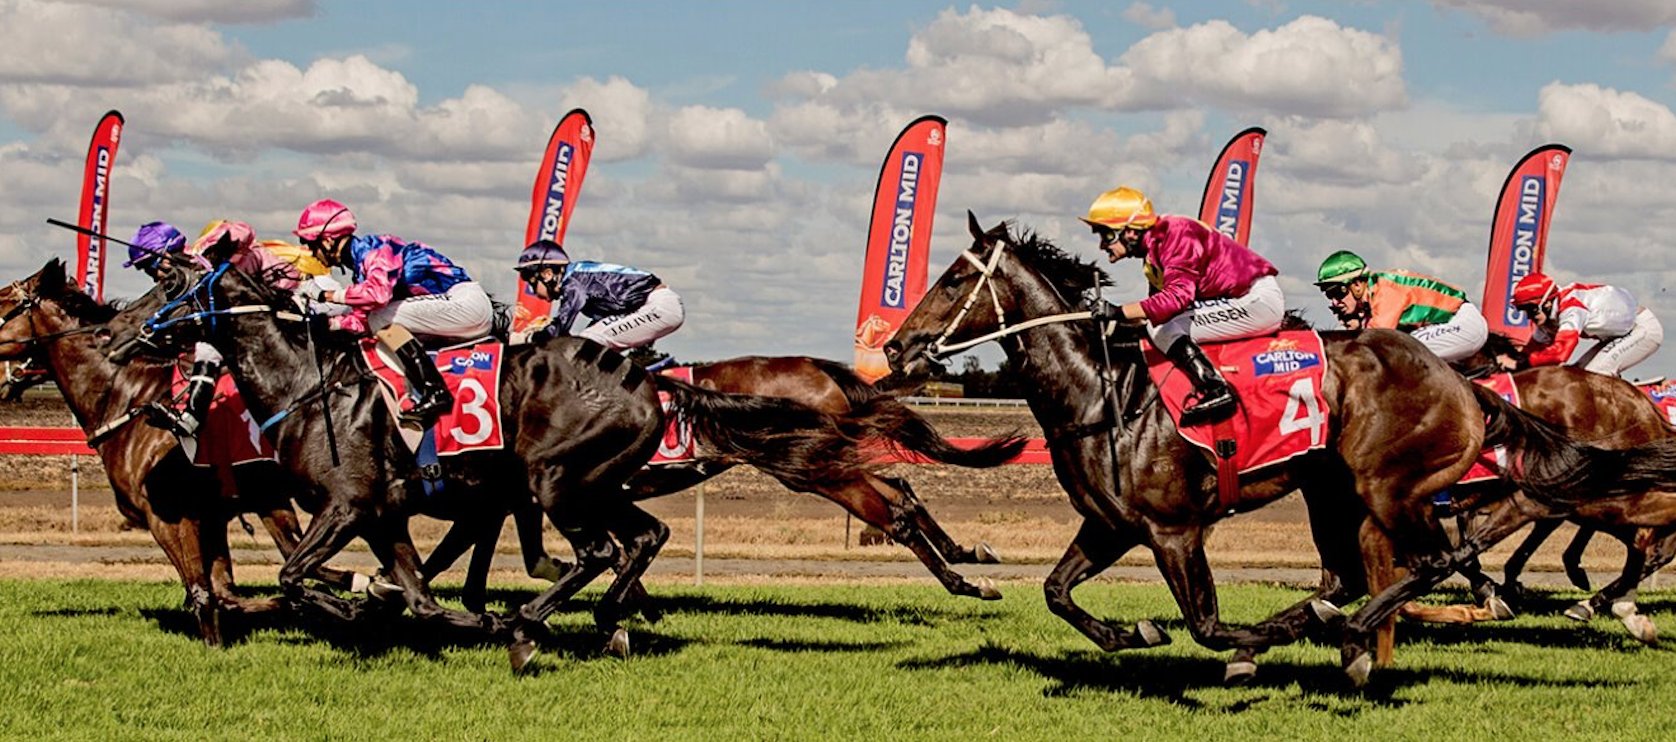 Things to do in Dalby, Dalby races